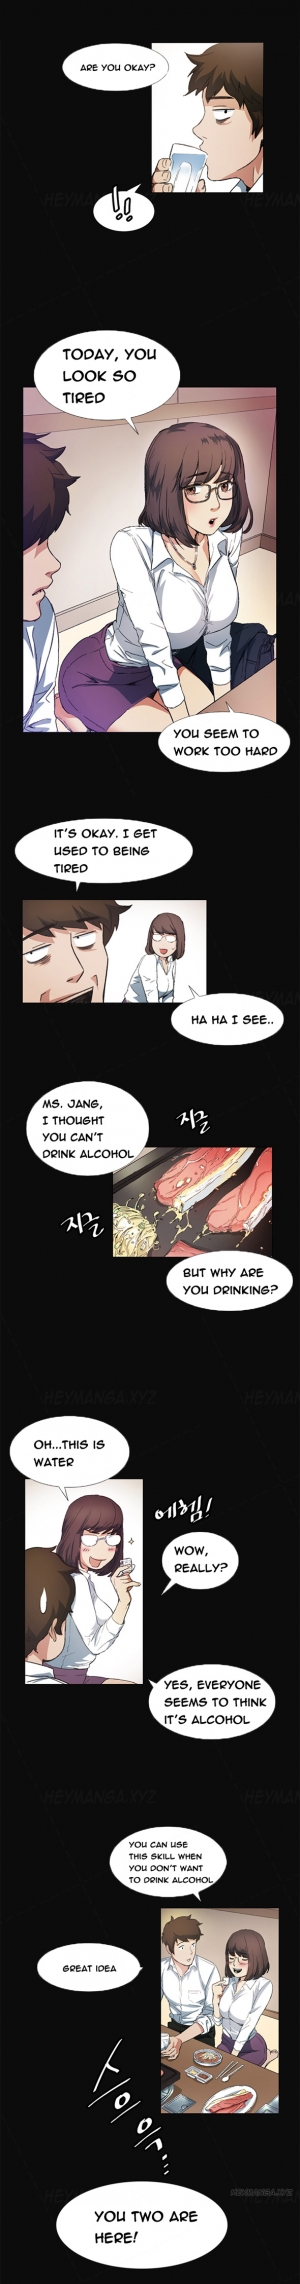  By Chance (Ep. 1-30)  [English] - Page 146